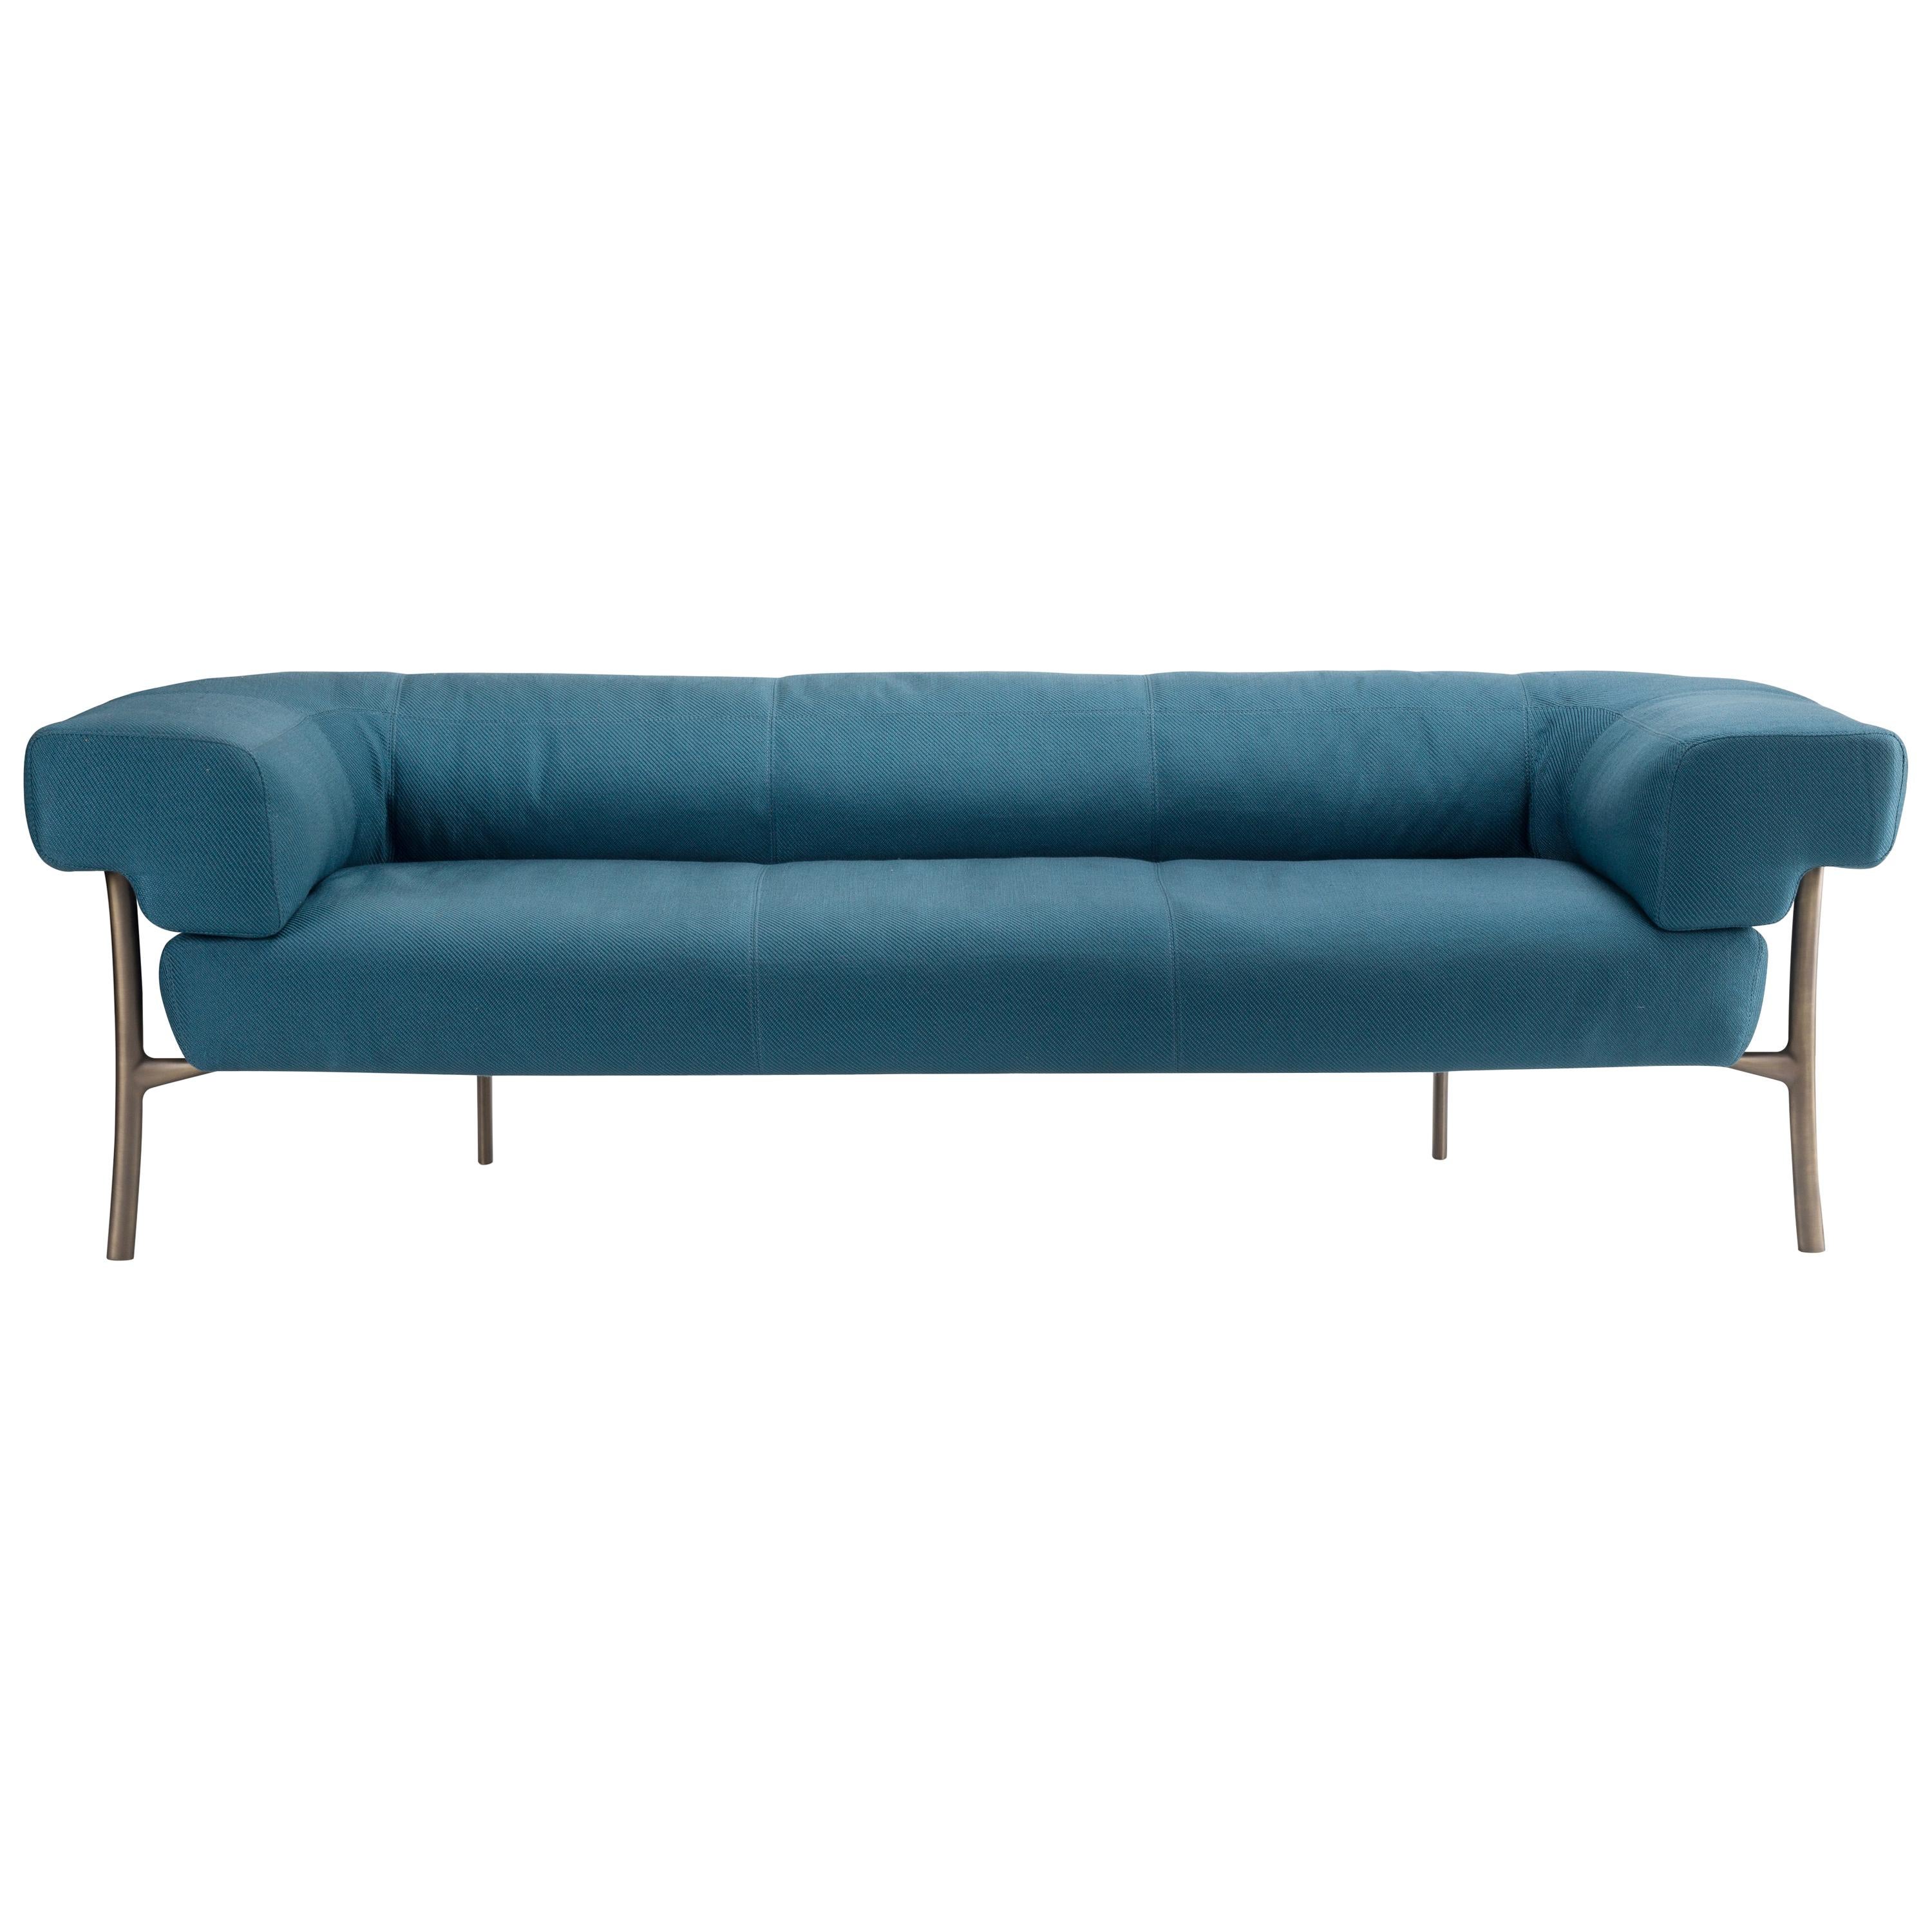 Katana 3 Seater Sofa in Blue Fabric with Brown Burnished Brass Legs For Sale